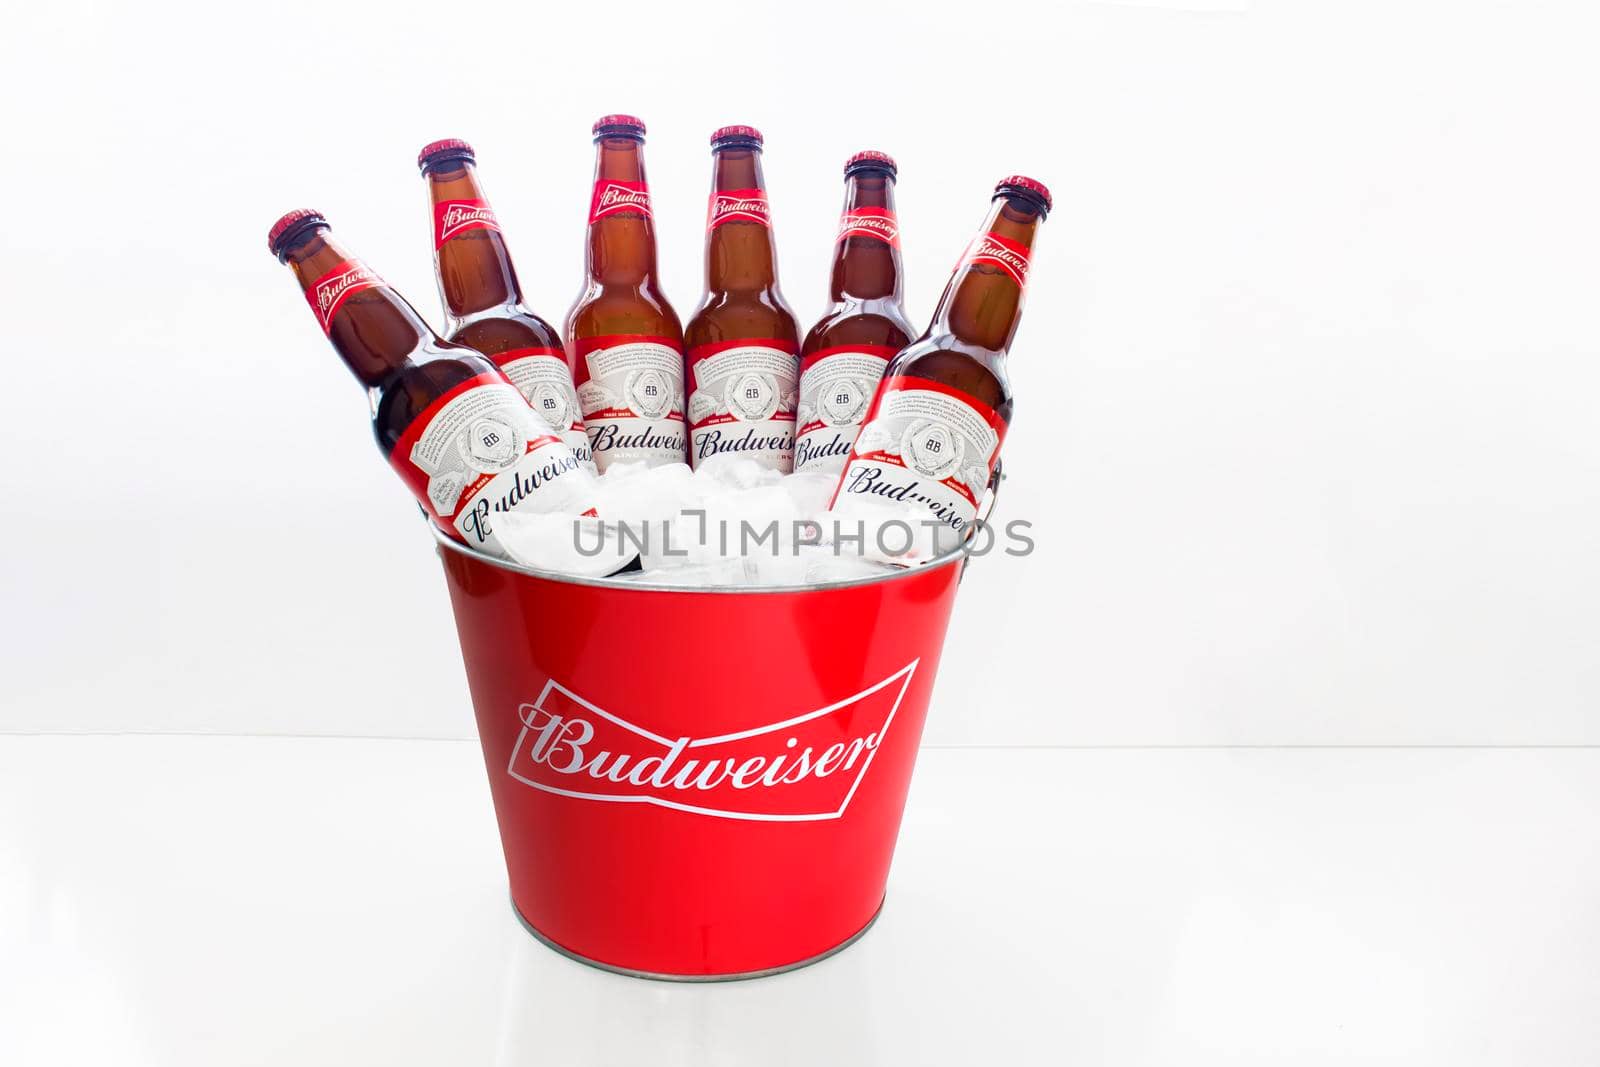 Calgary Alberta, Canada. April 02, 2021. A Budweiser Beer Bucket American-style pale lager with six beer bottles with ice on a white background.